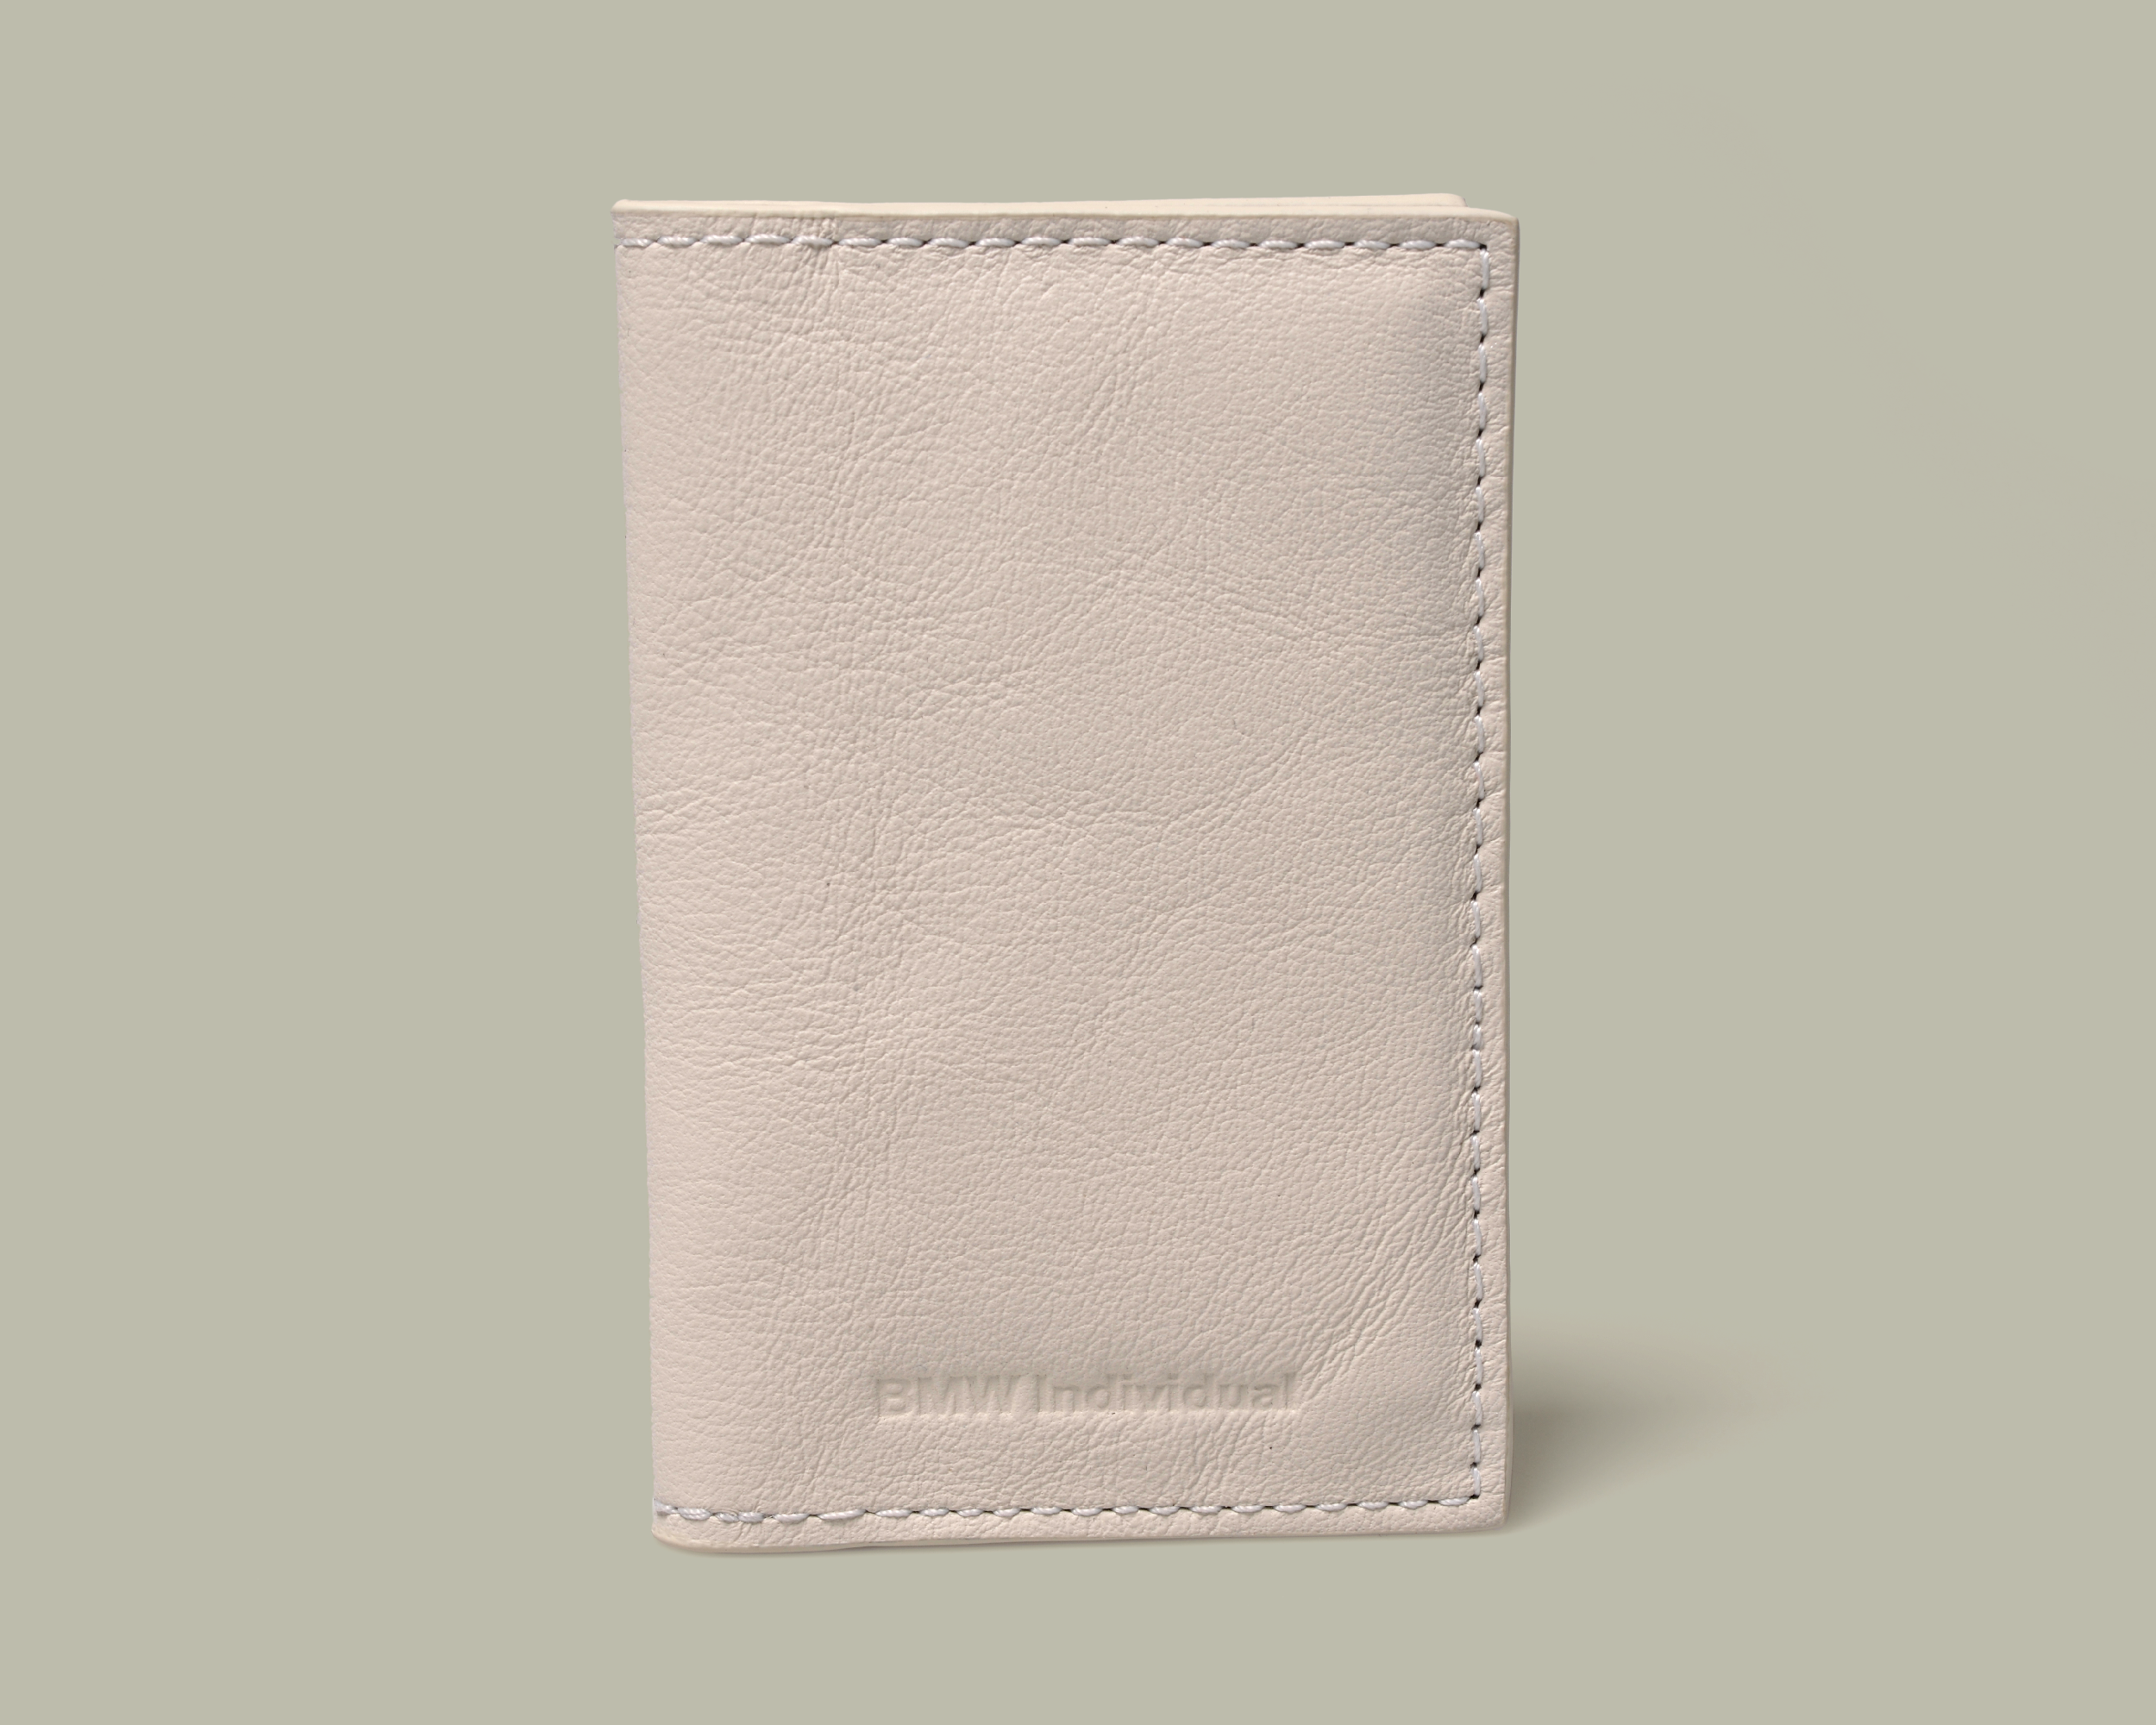 brandcraft_privatelabel_merchandise_agency_supplier_logo_emboss_die_punch_leather_artificial_leather_pu_packaging_packaging_packaging_bmw_individual_kfzpapier_mappe_car_AJH_8224x.png